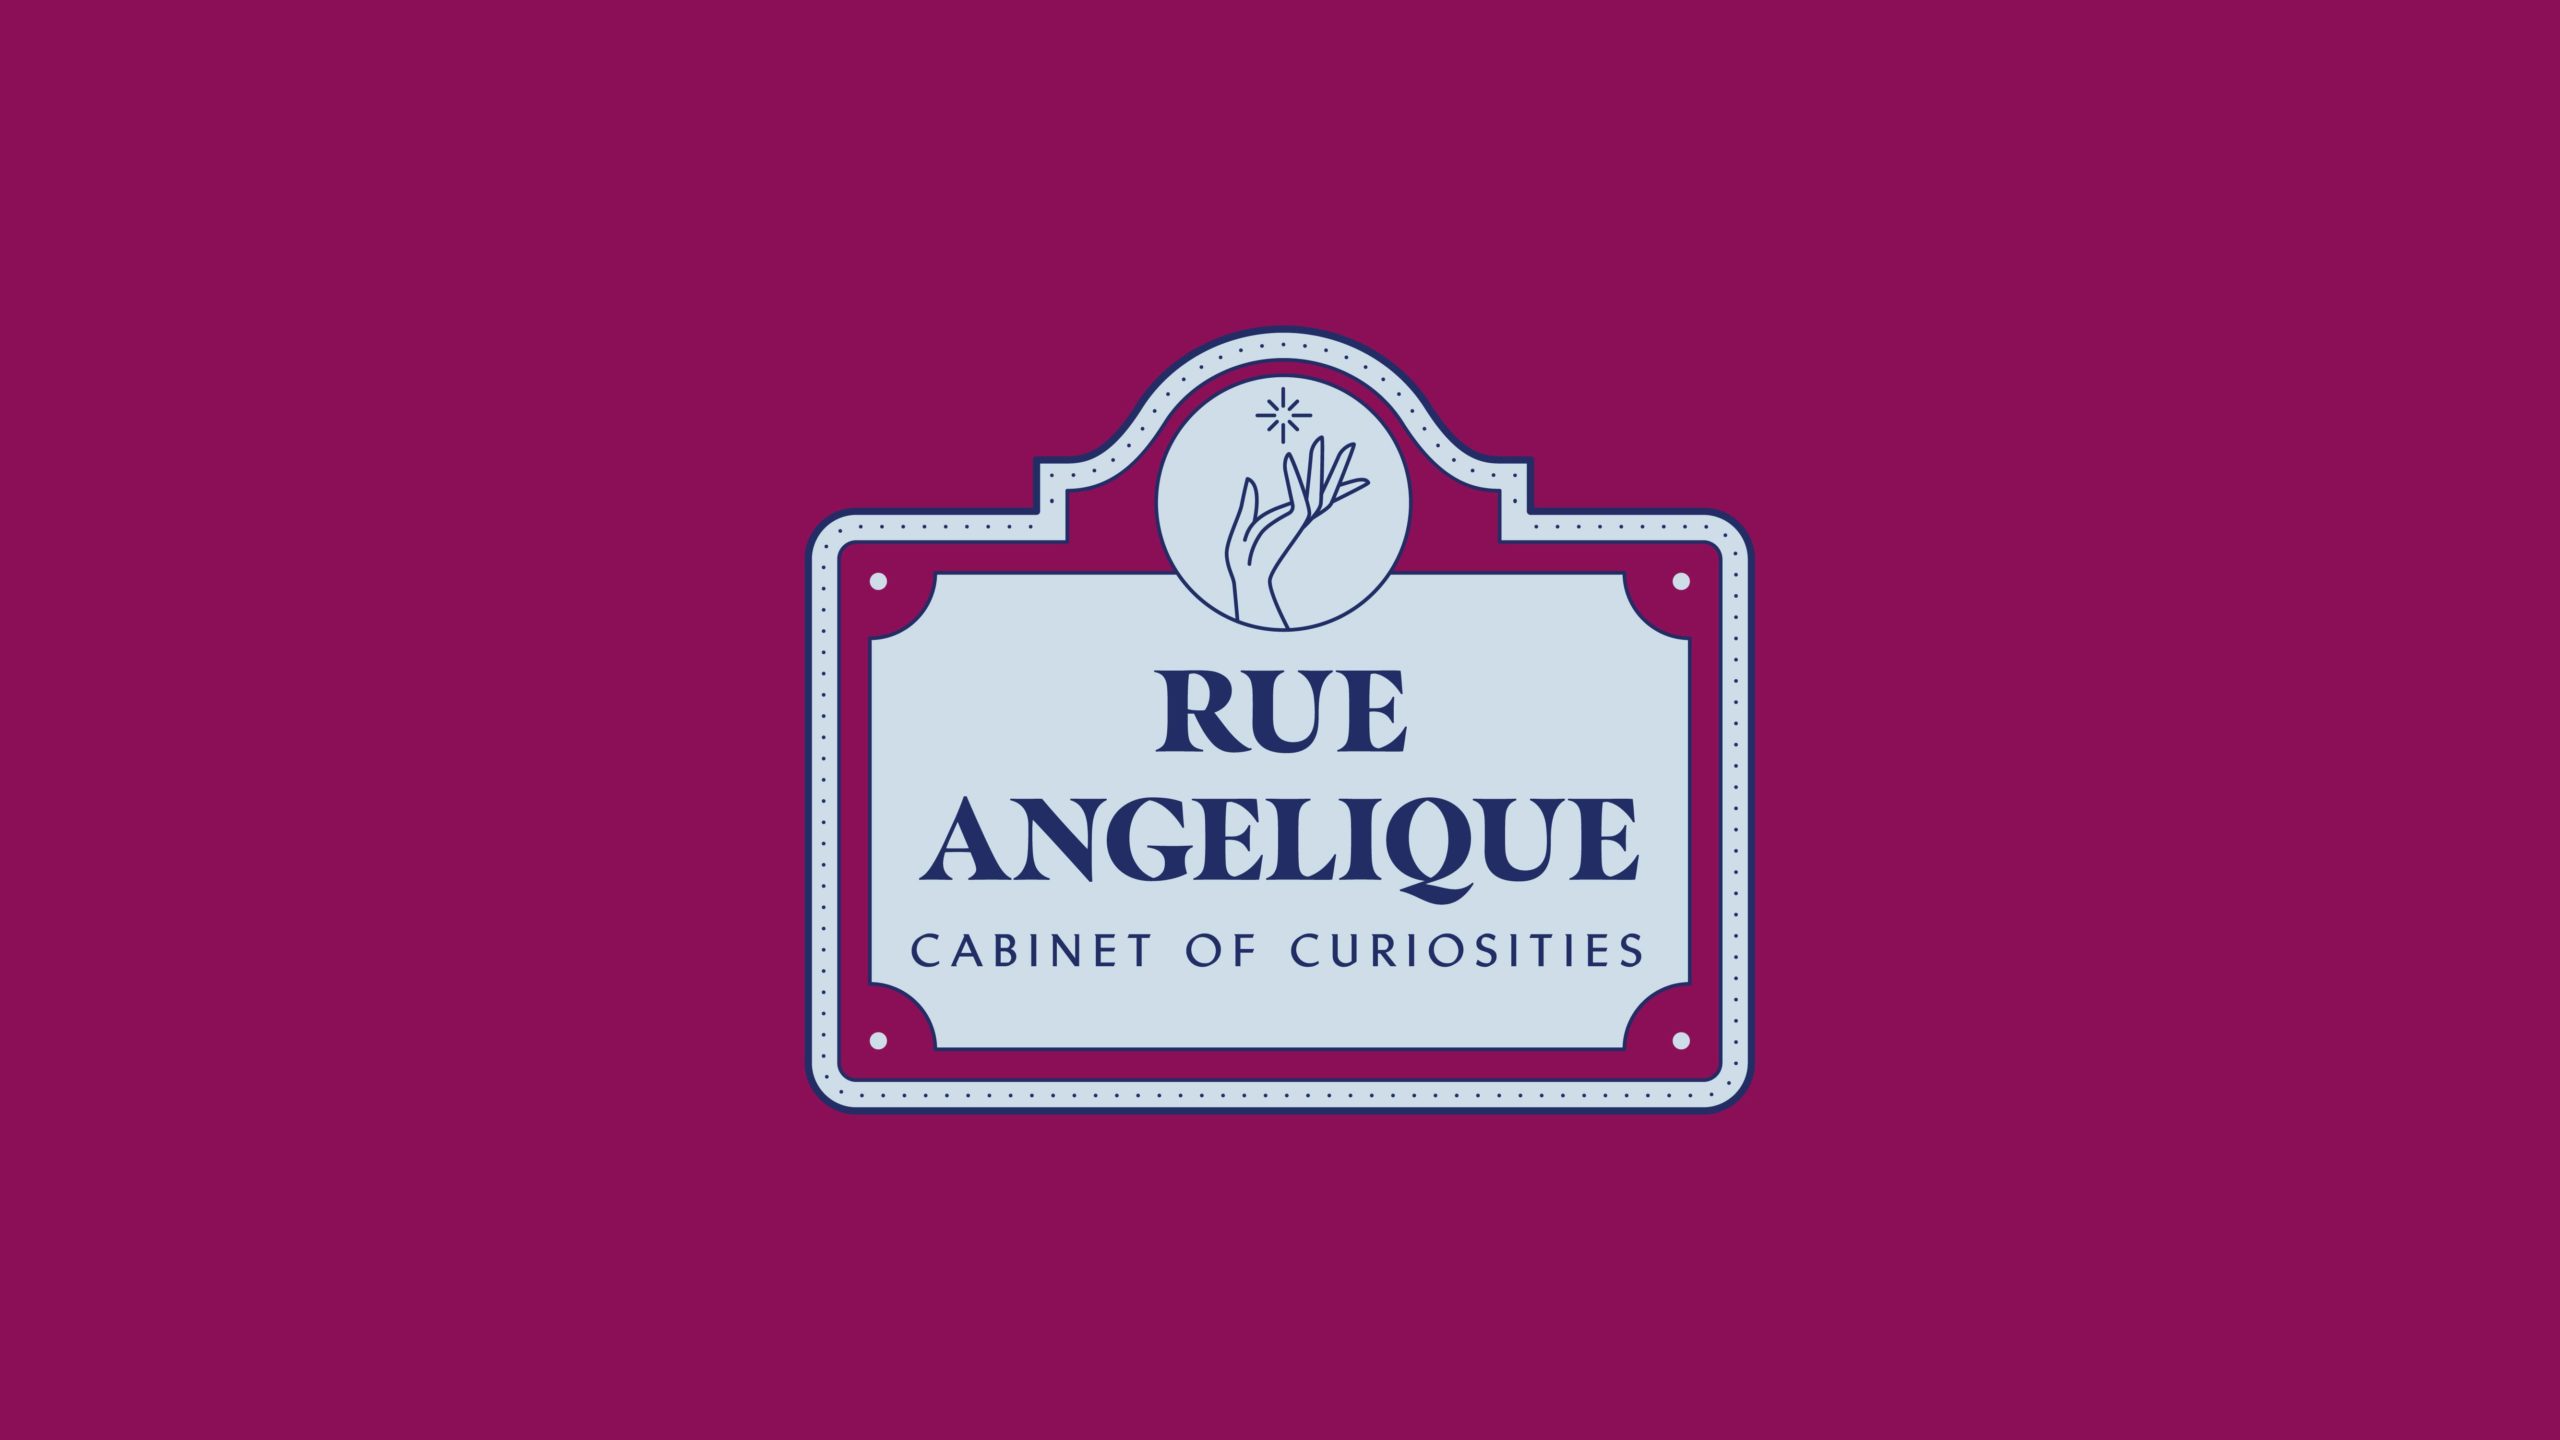 Paris street sign-inspired logo for antiques store Rue Angelique